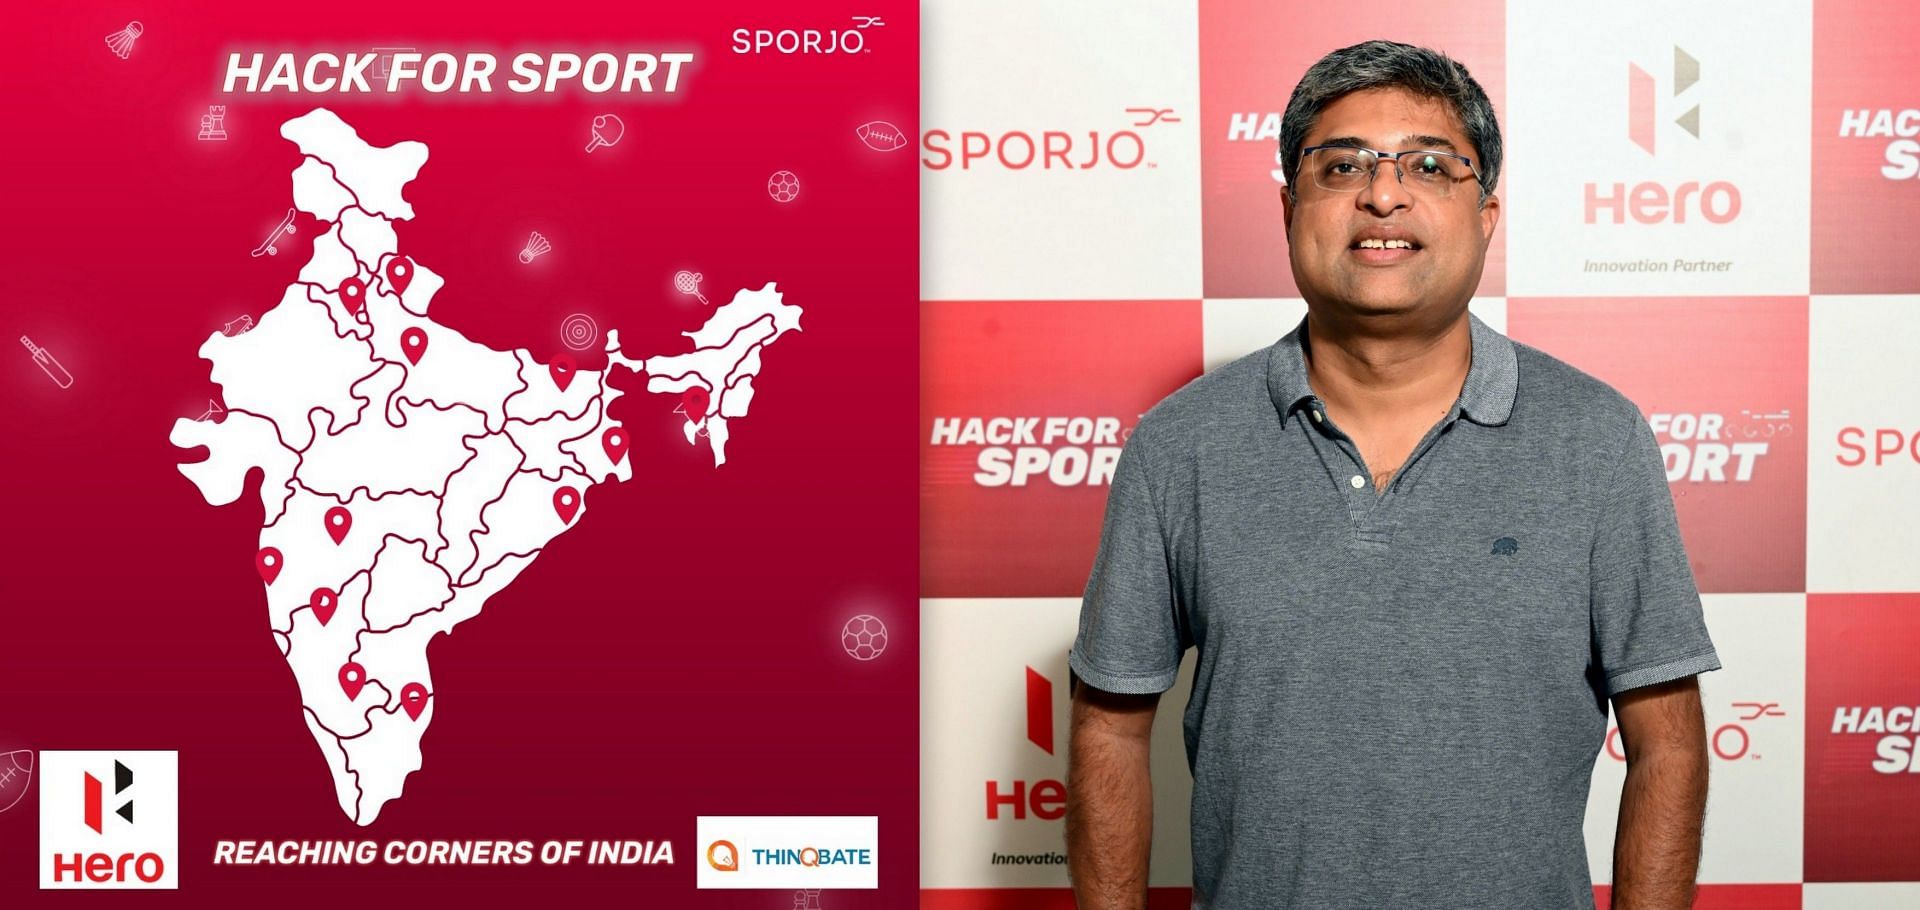 A delighted G. Srinivvasan (right) after successfully conducting the first edition of Hack for Sport. Image Courtesy: Sporjo